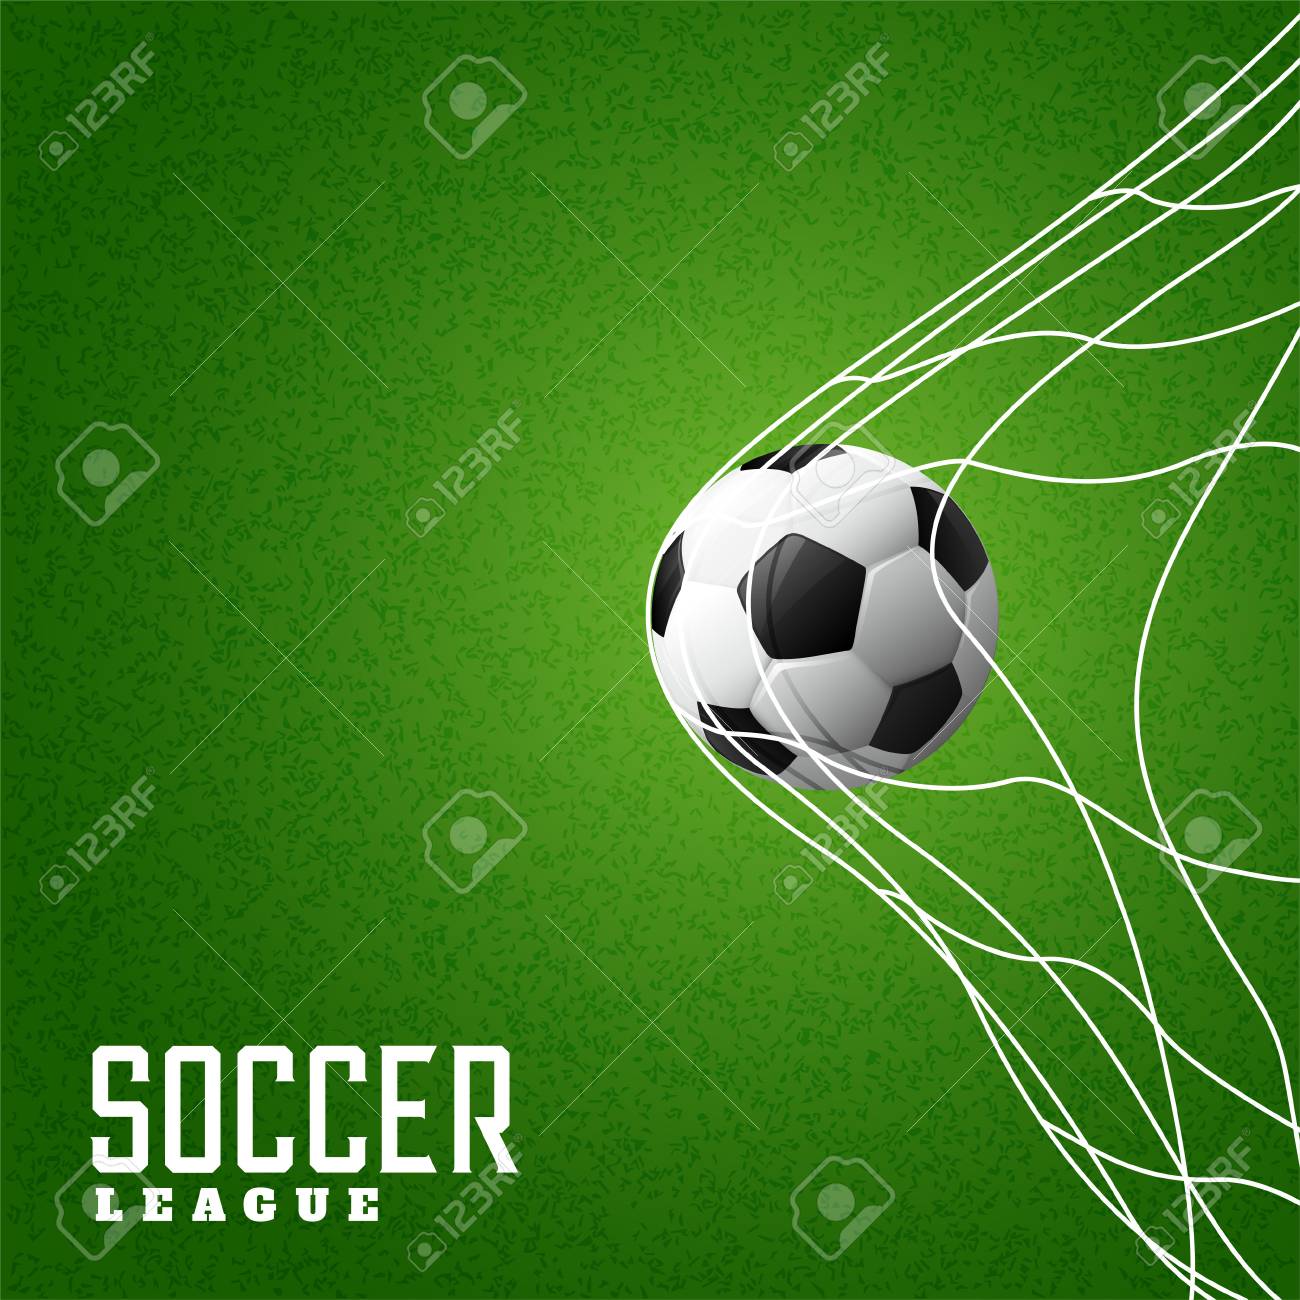 Football Hitting Goal Net Background Royalty Free Cliparts